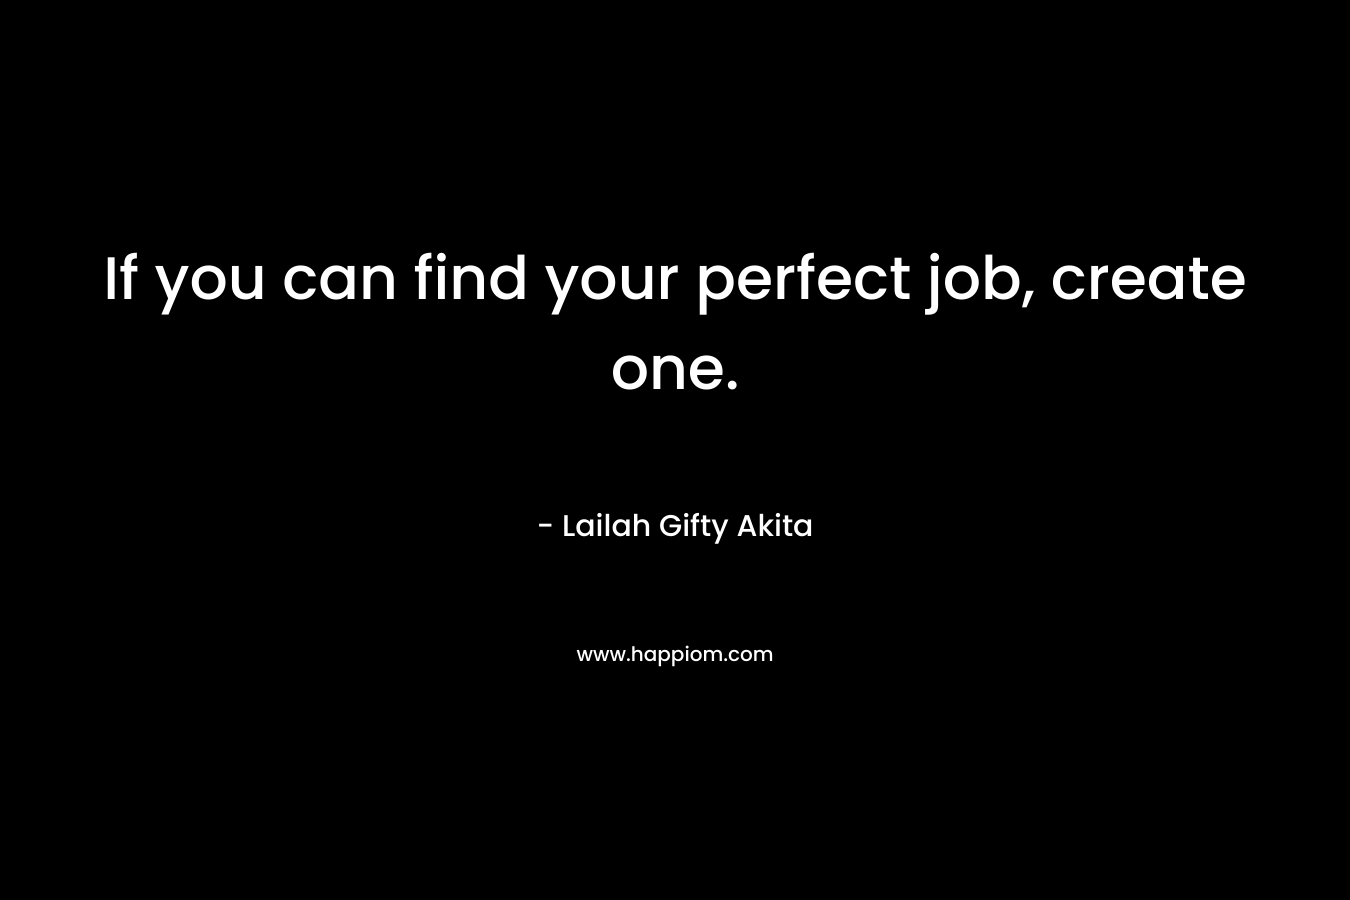 If you can find your perfect job, create one.